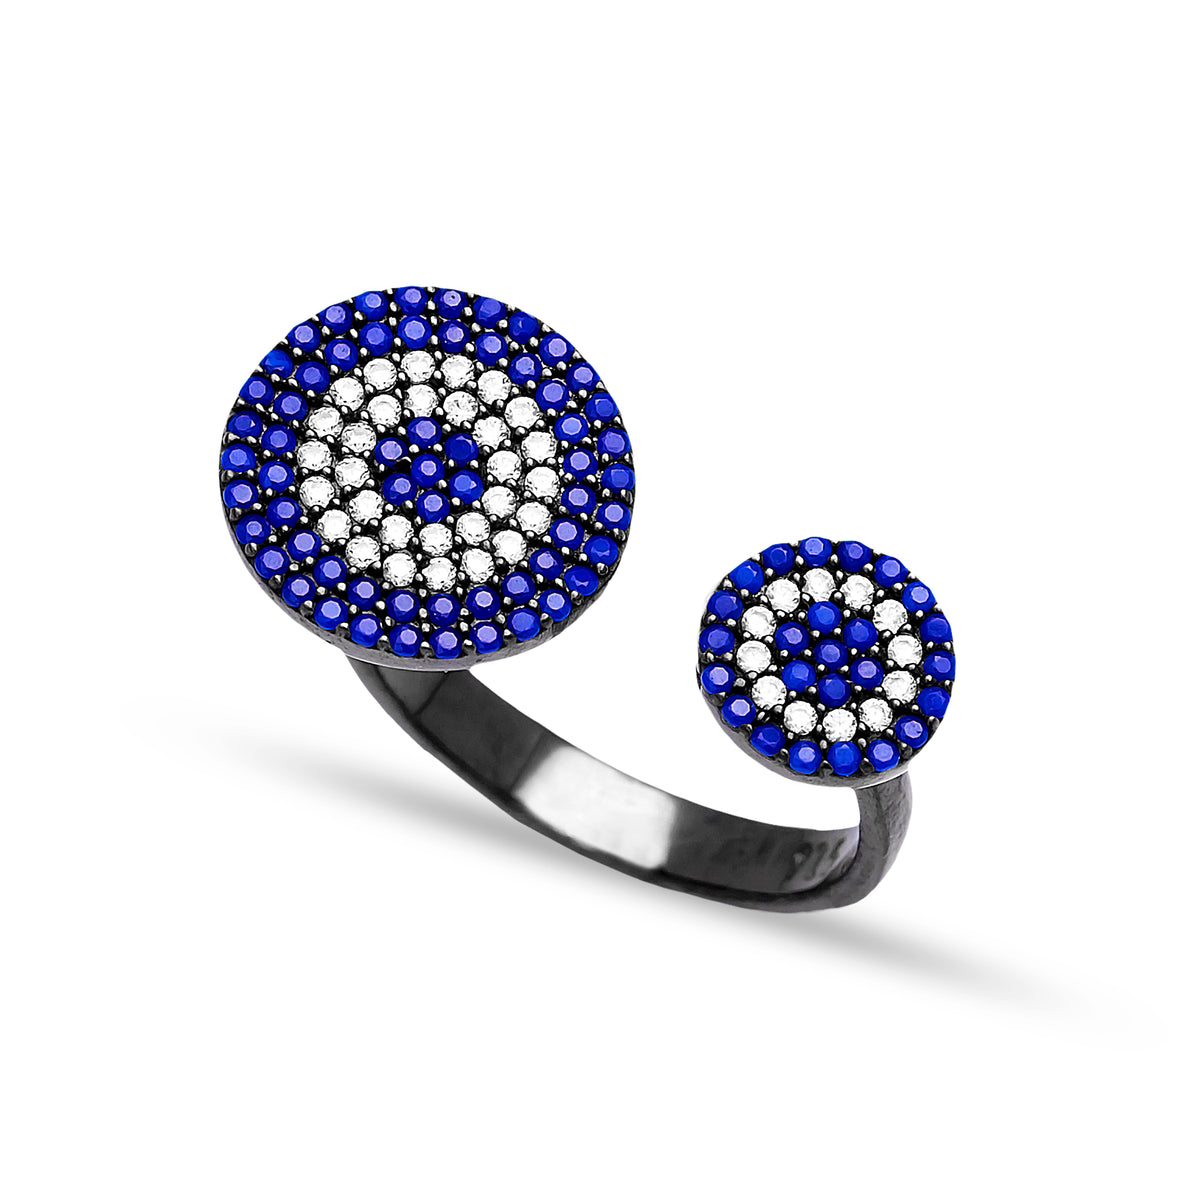 Adjustable Round Ring In Turkish Handcrafted Silver Jewelry